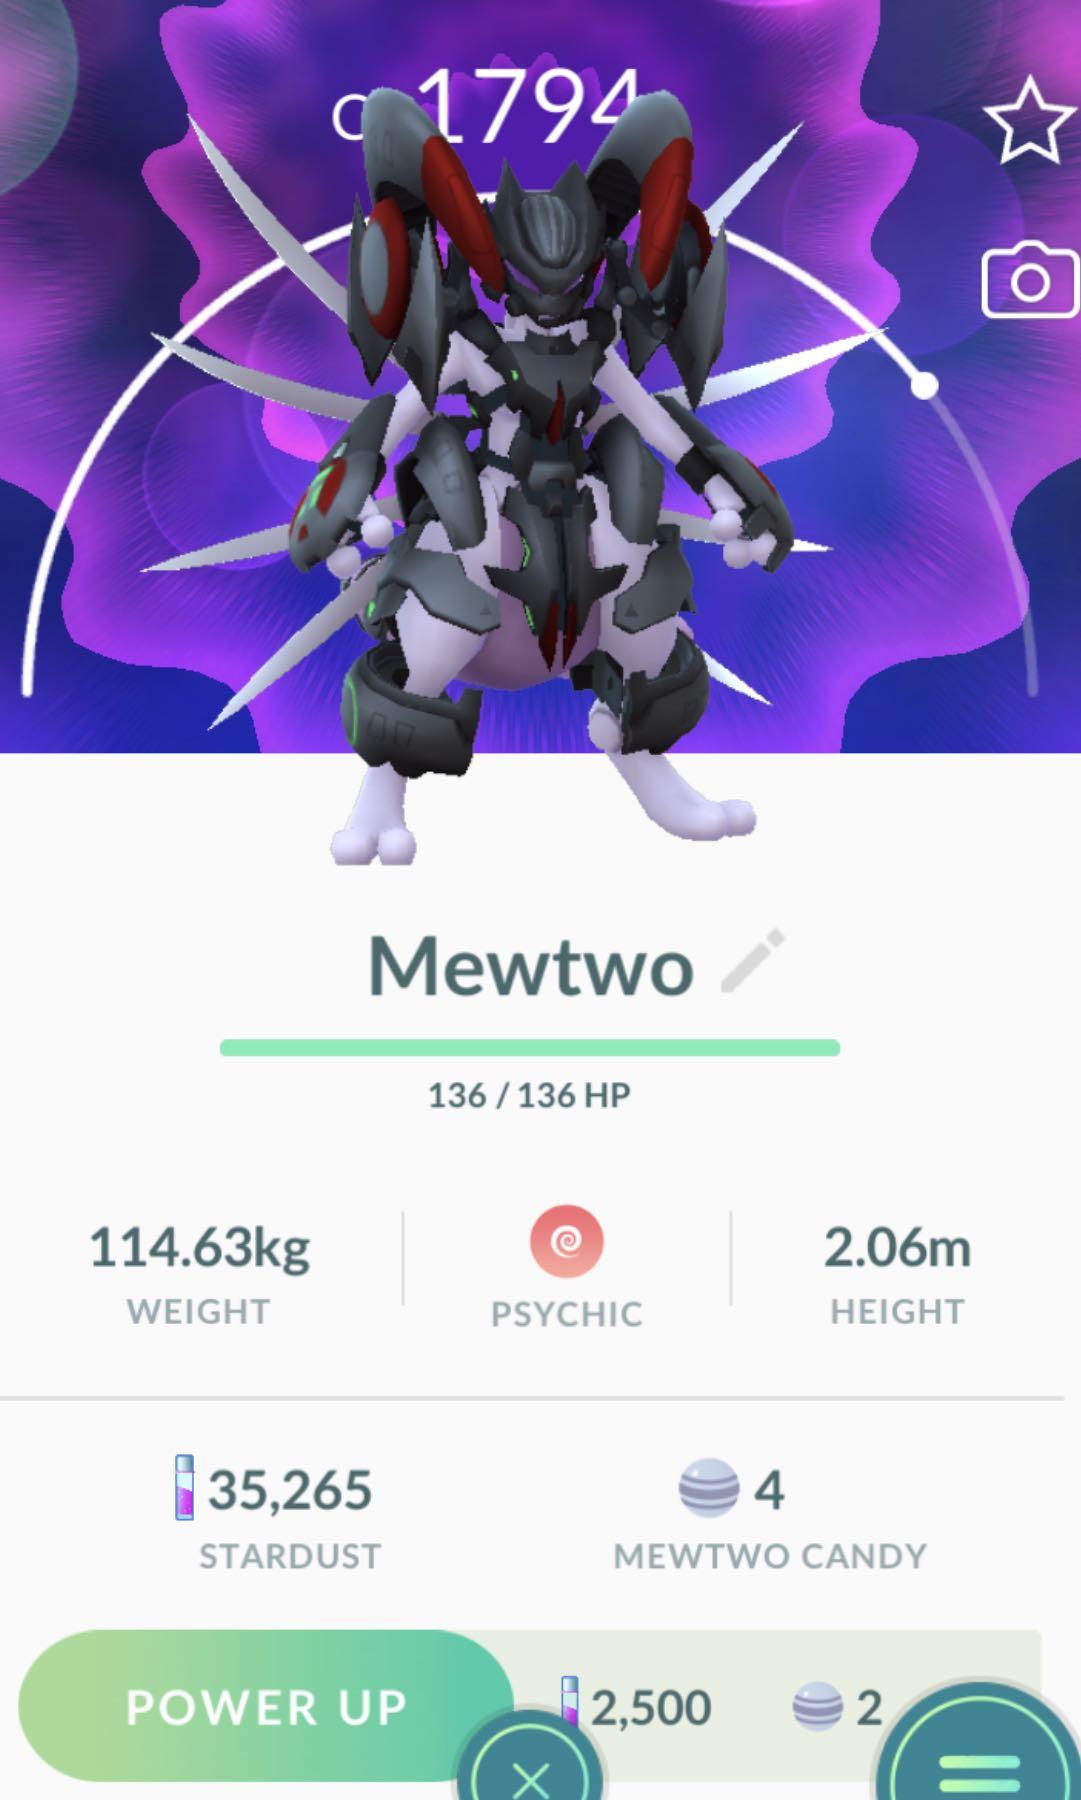 How To Get Armored Mewtwo in Pokemon Go